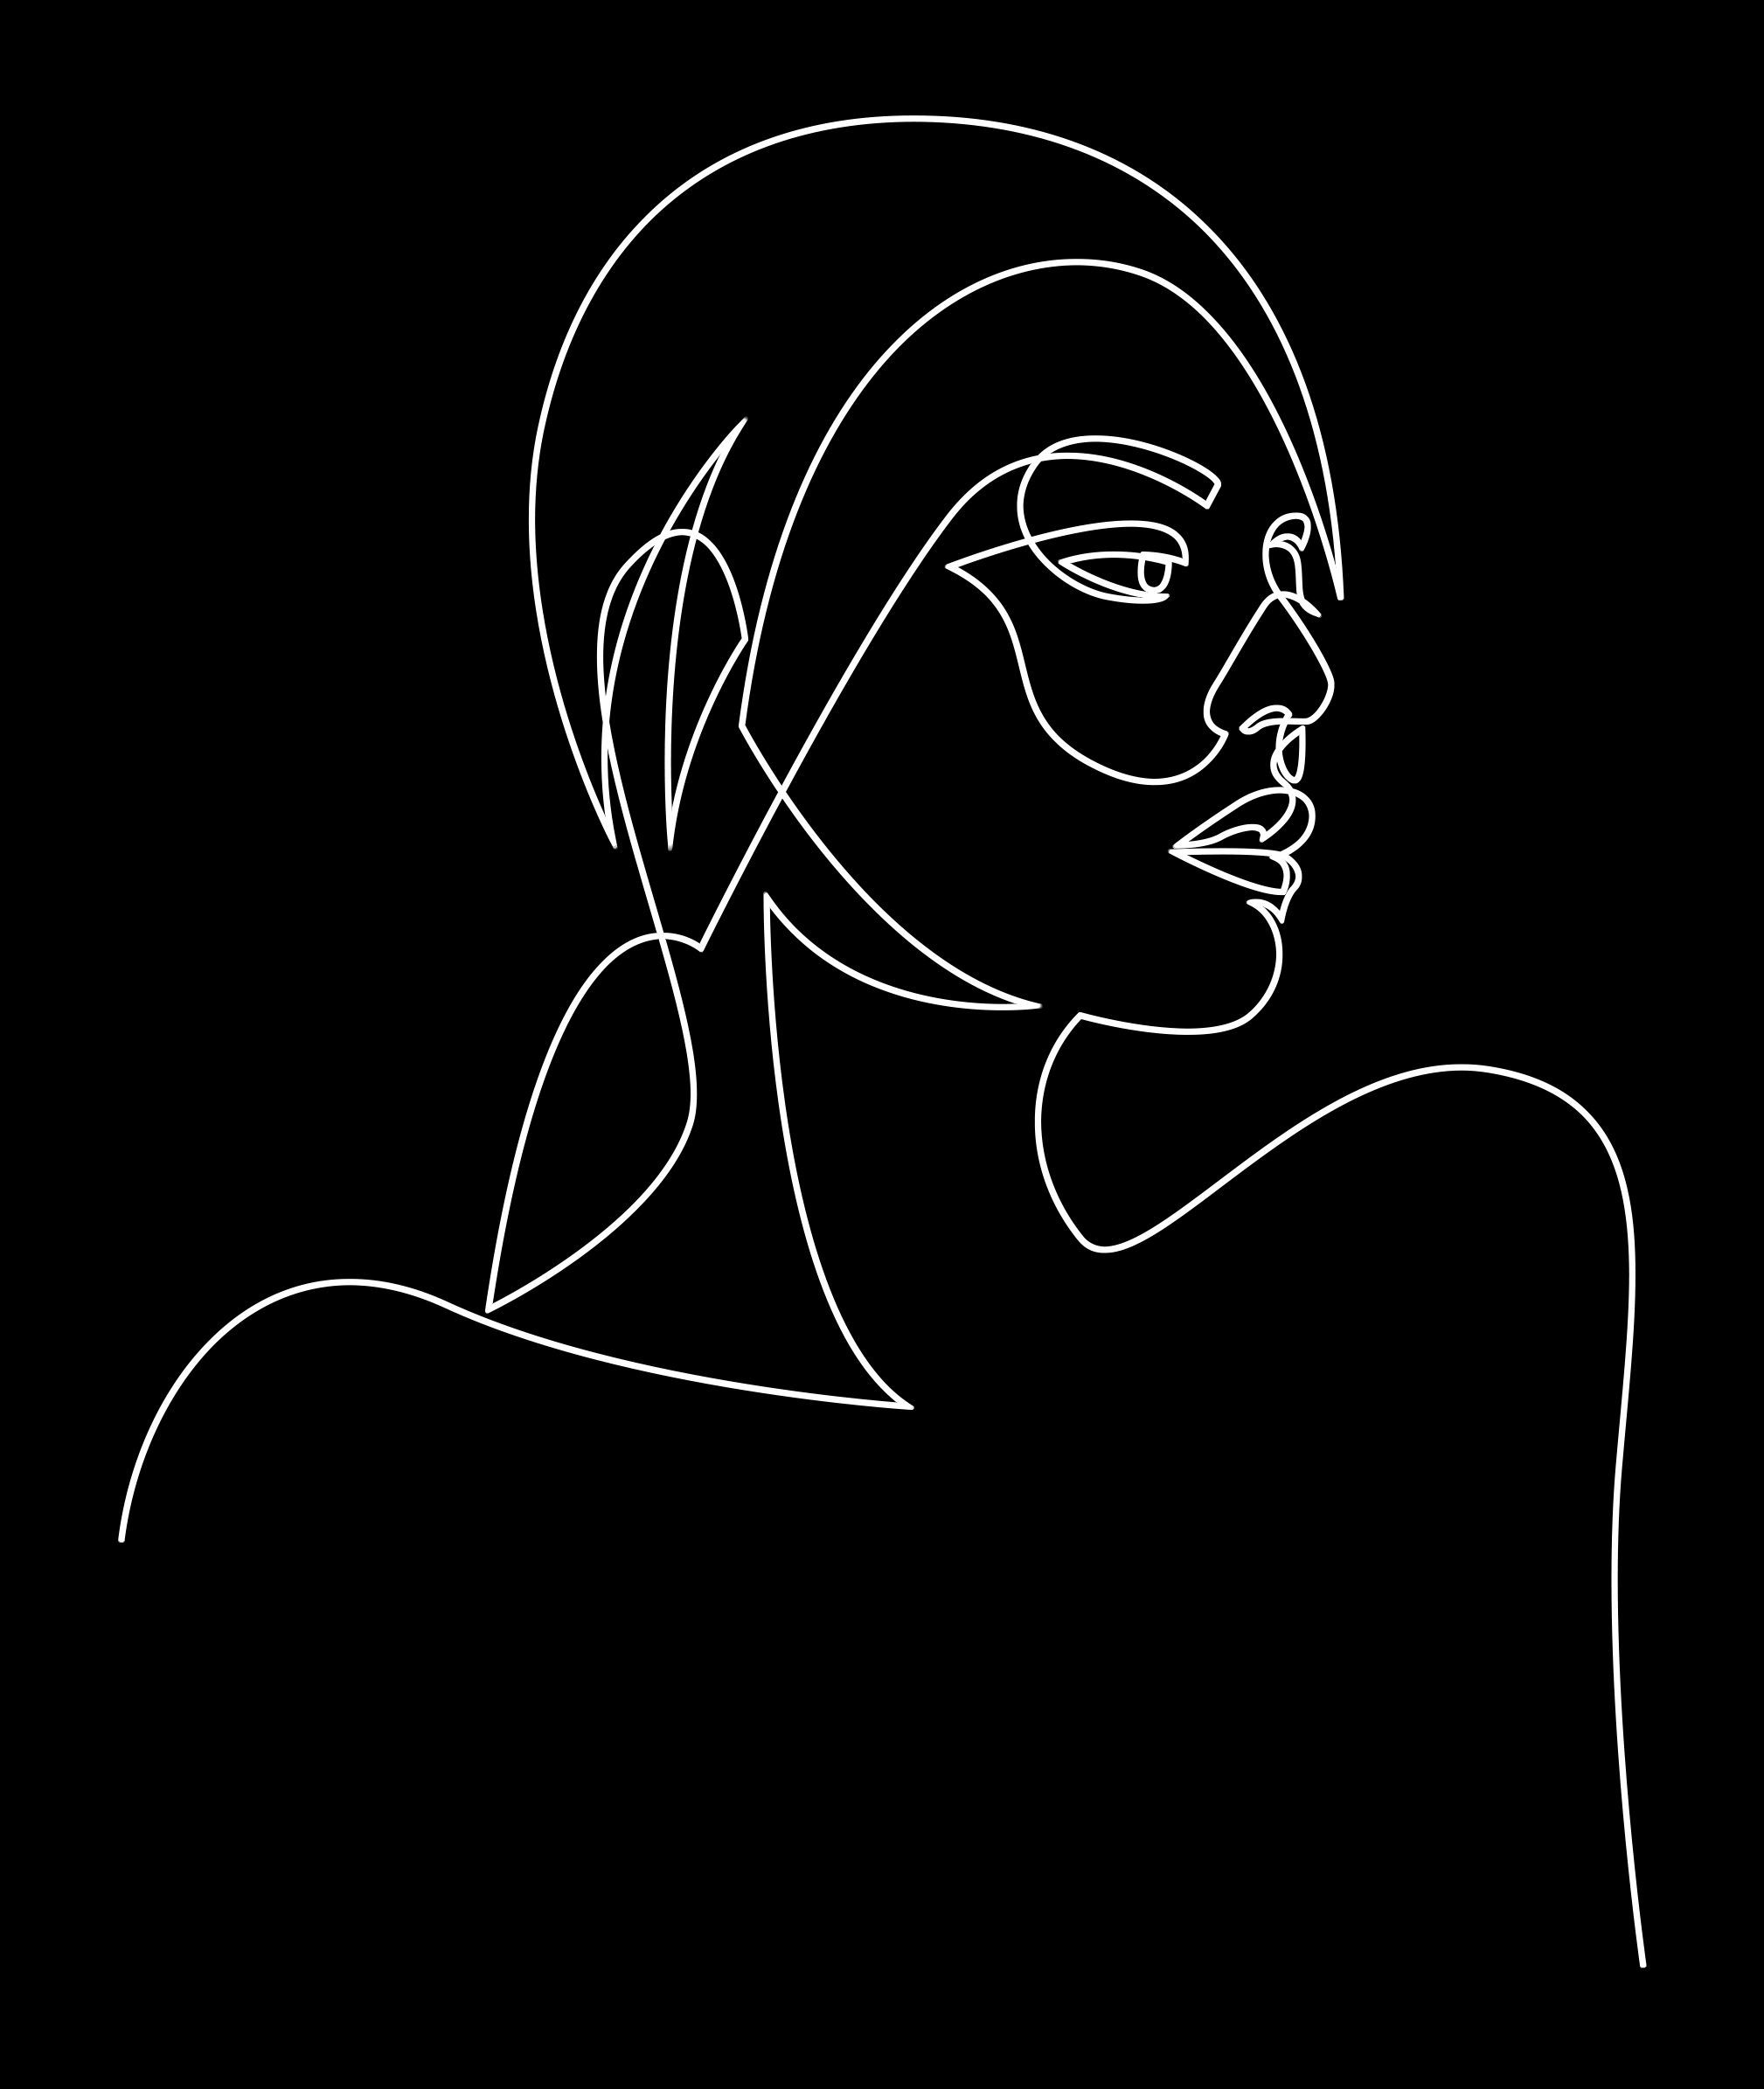 One Line Art Wallpapers - Wallpaper Cave